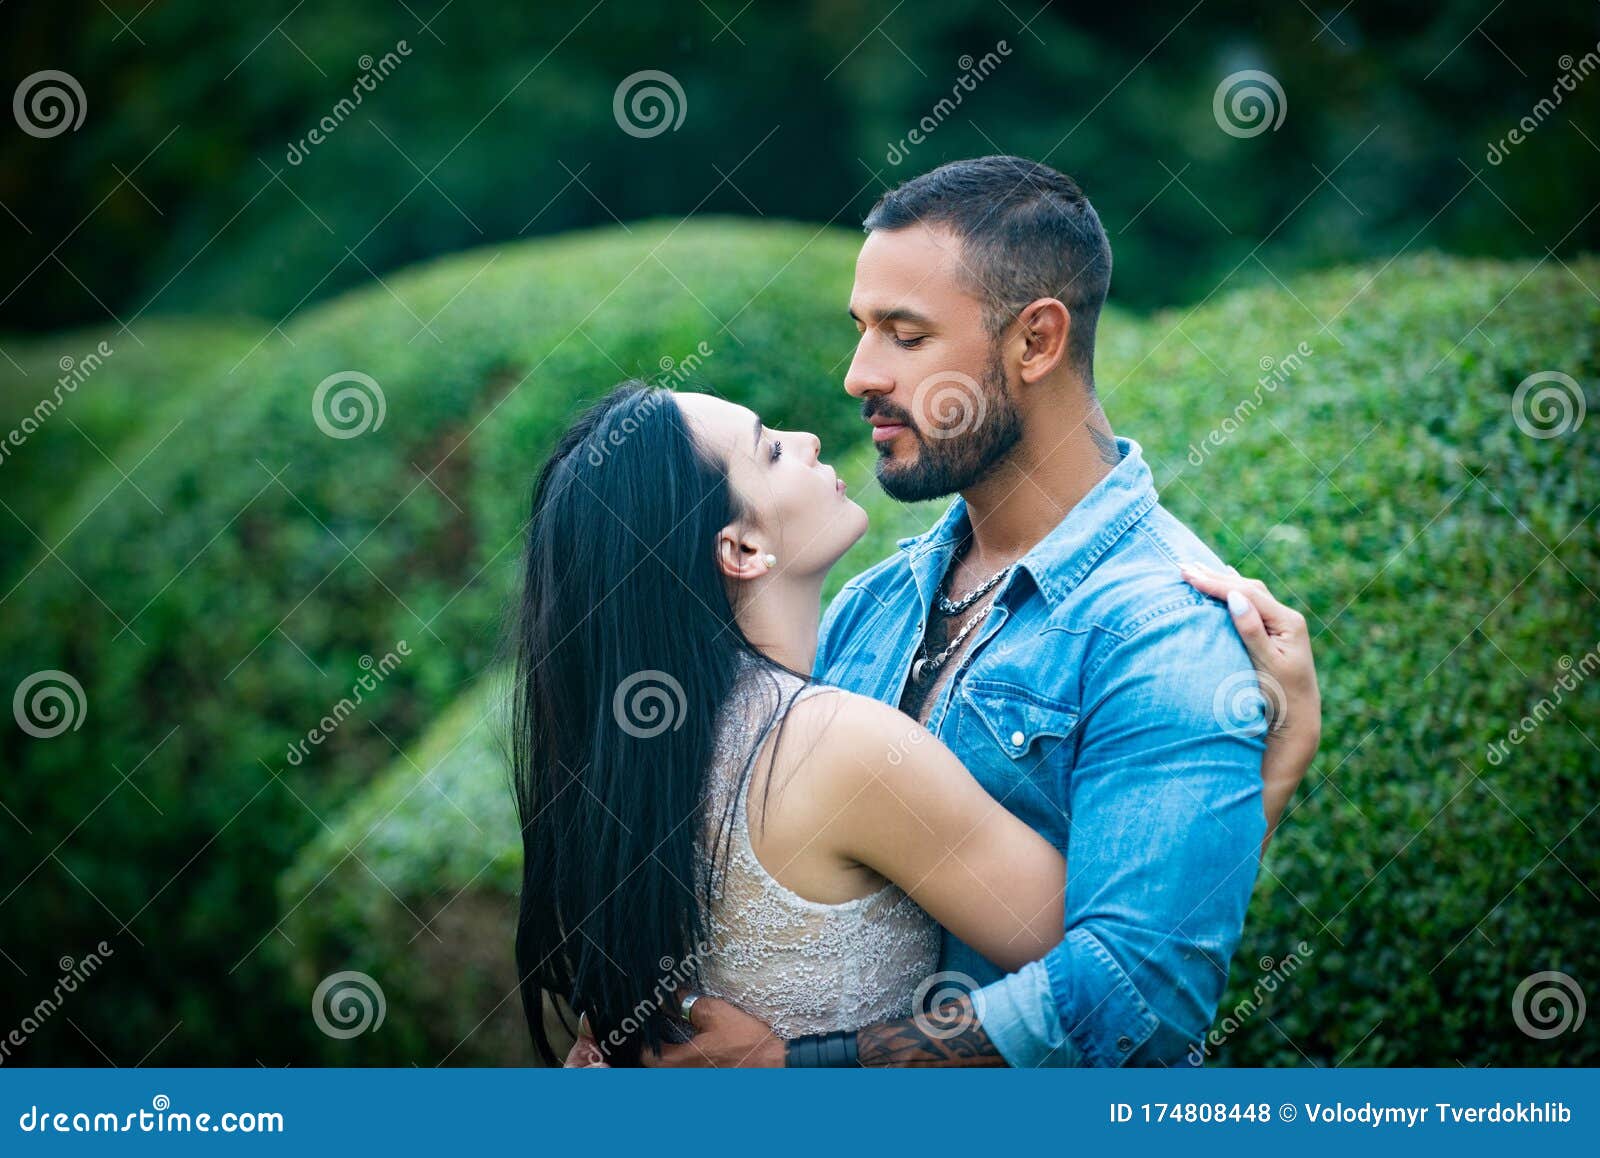 Young Tender Lover Enjoys Touching Soft Skin Of Sensual Lady Sensual